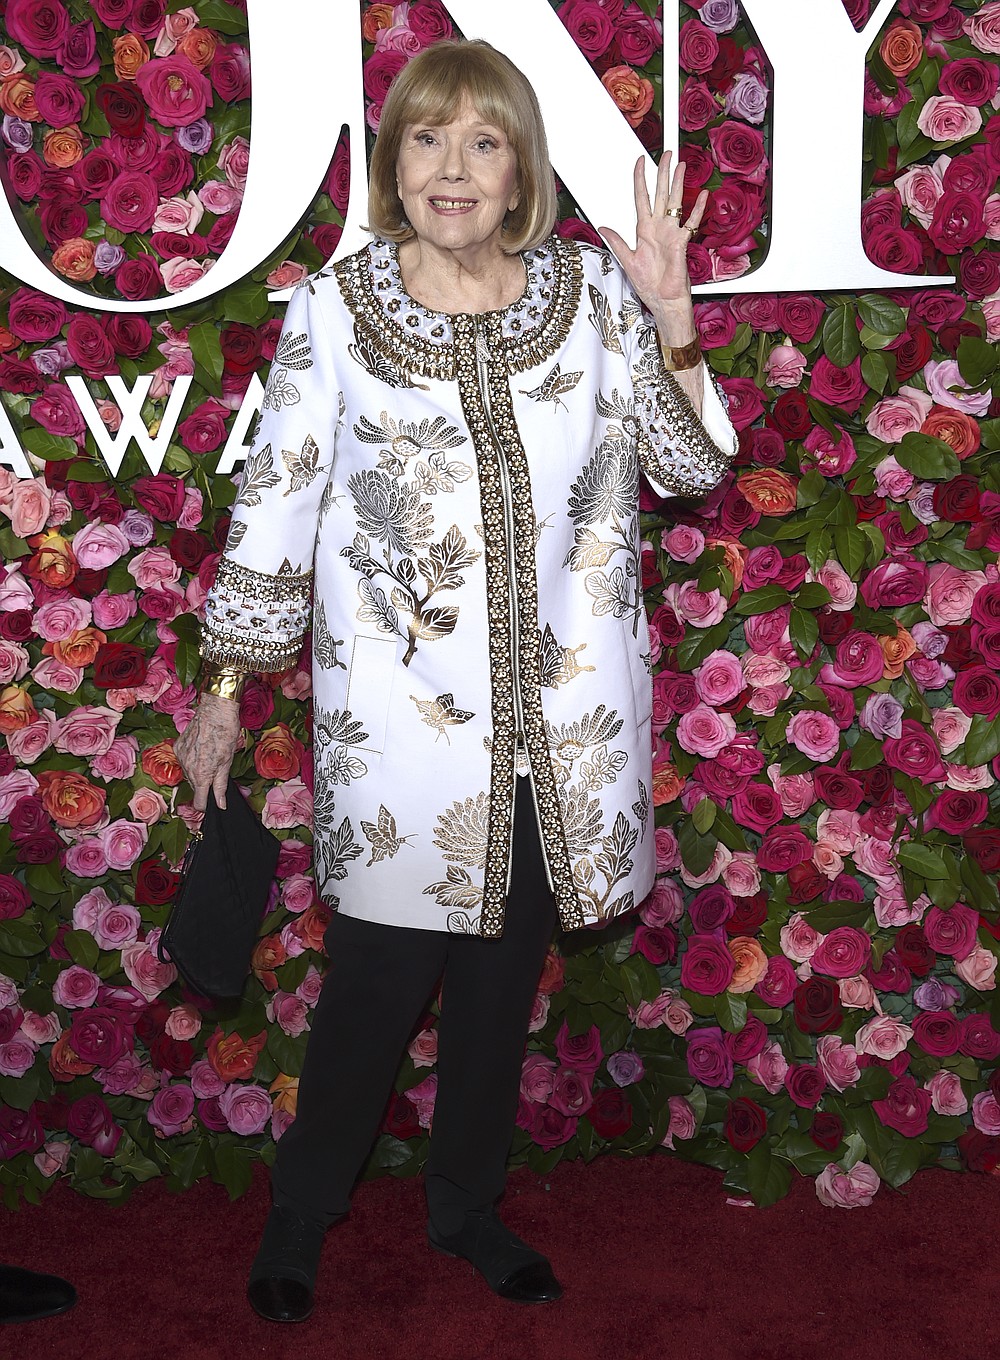 FILE - In this Sunday, June 10, 2018 file photo, Britain's Diana Rigg arrives at the 72nd annual Tony Awards at Radio City Music Hall in New York. Actress Diana Rigg, who became a 1960s style icon as secret agent Emma Peel in TV series “The Avengers,” has died at age 82. Rigg’s agent Simon Beresford says she died Thursday Sept. 10, 2020 at home with her family. (Photo by Evan Agostini/Invision/AP, File)